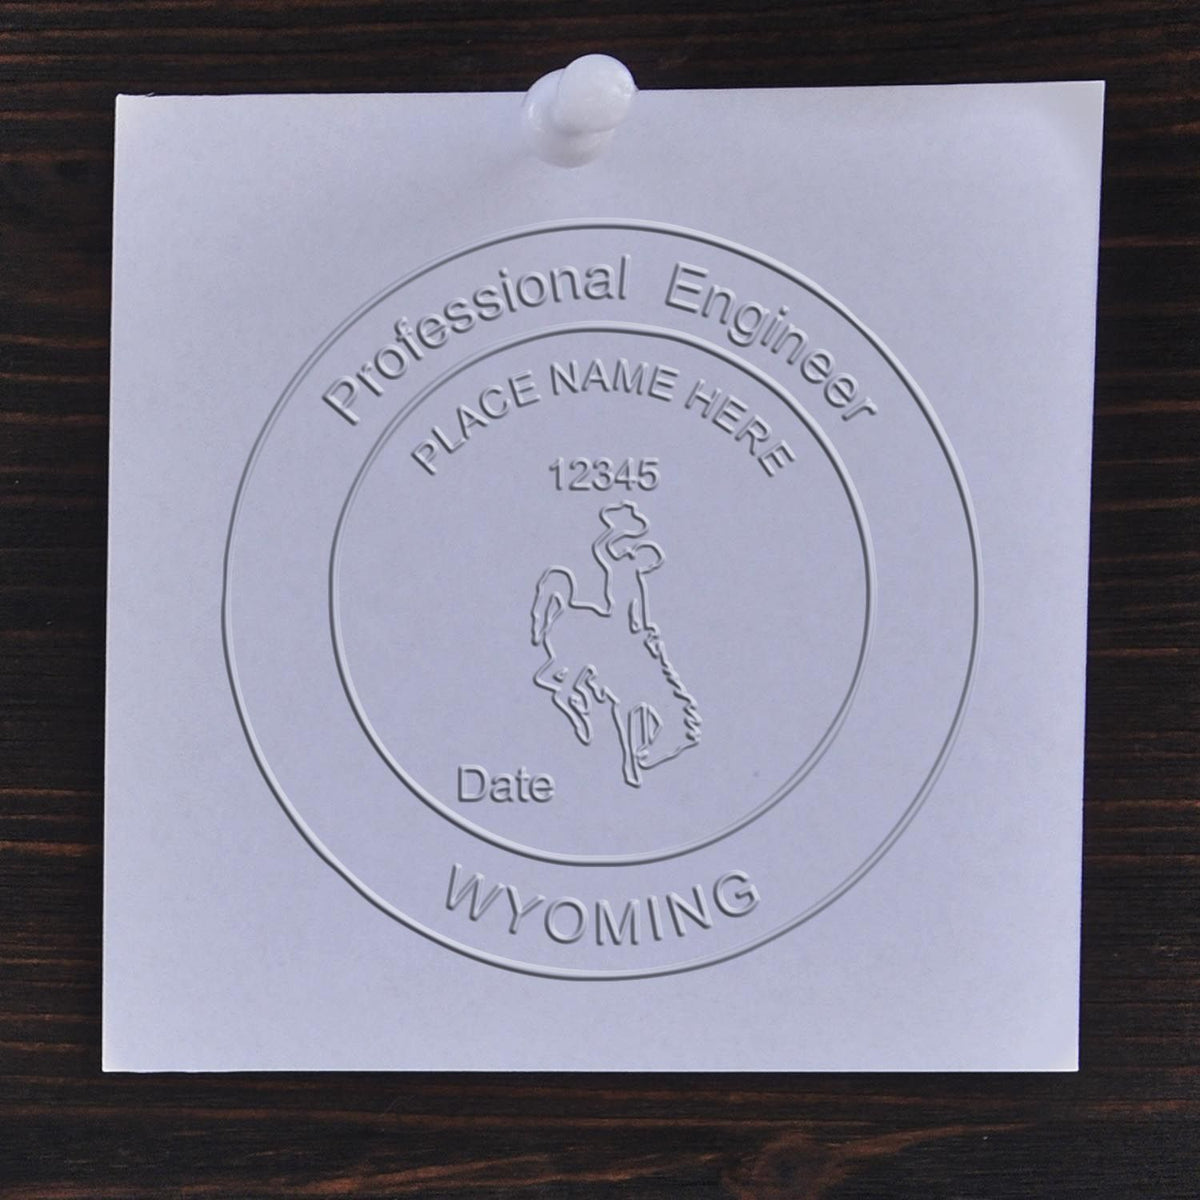 A stamped impression of the Soft Wyoming Professional Engineer Seal in this stylish lifestyle photo, setting the tone for a unique and personalized product.